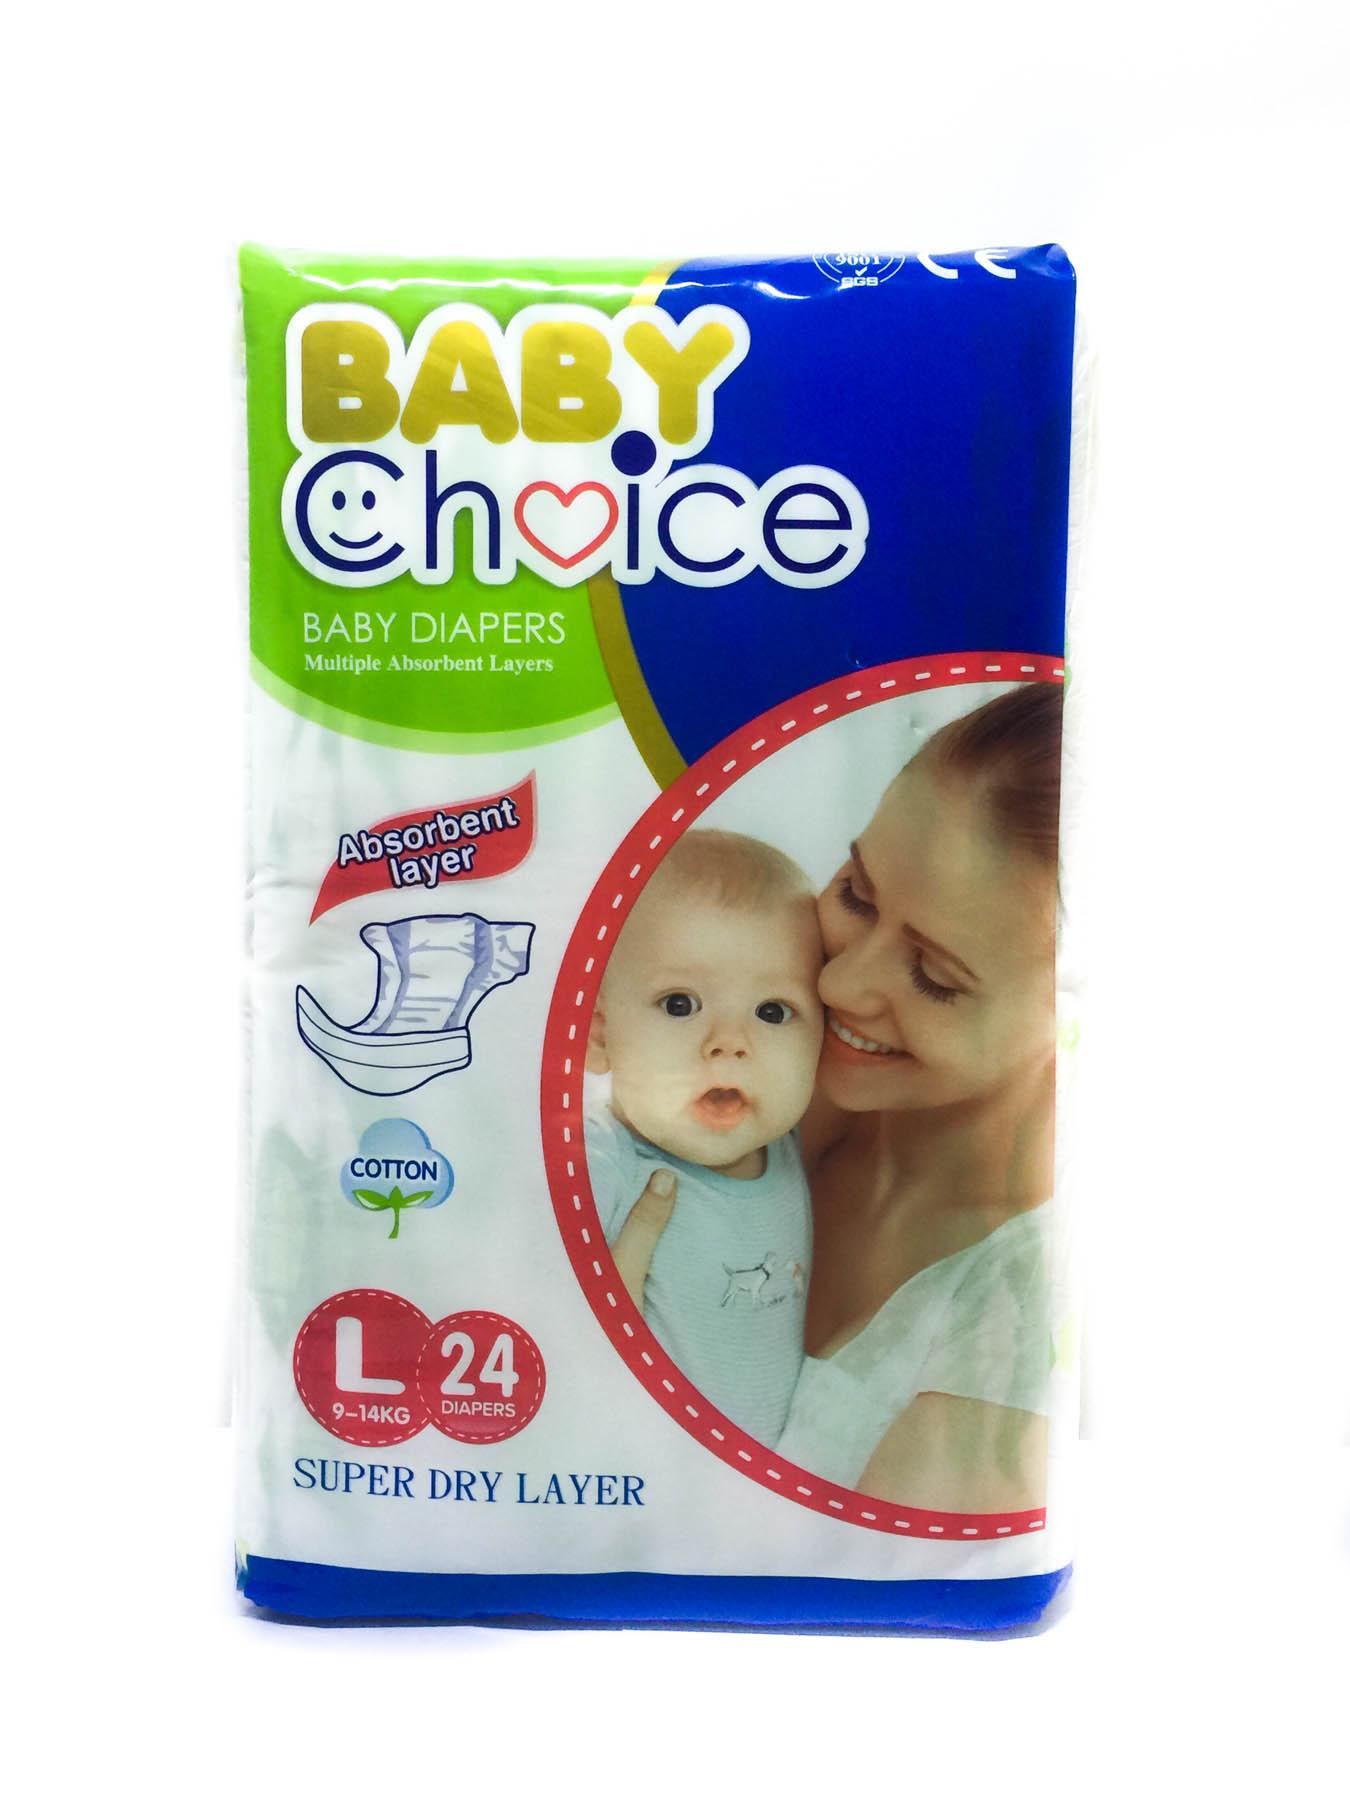 baby choice diapers